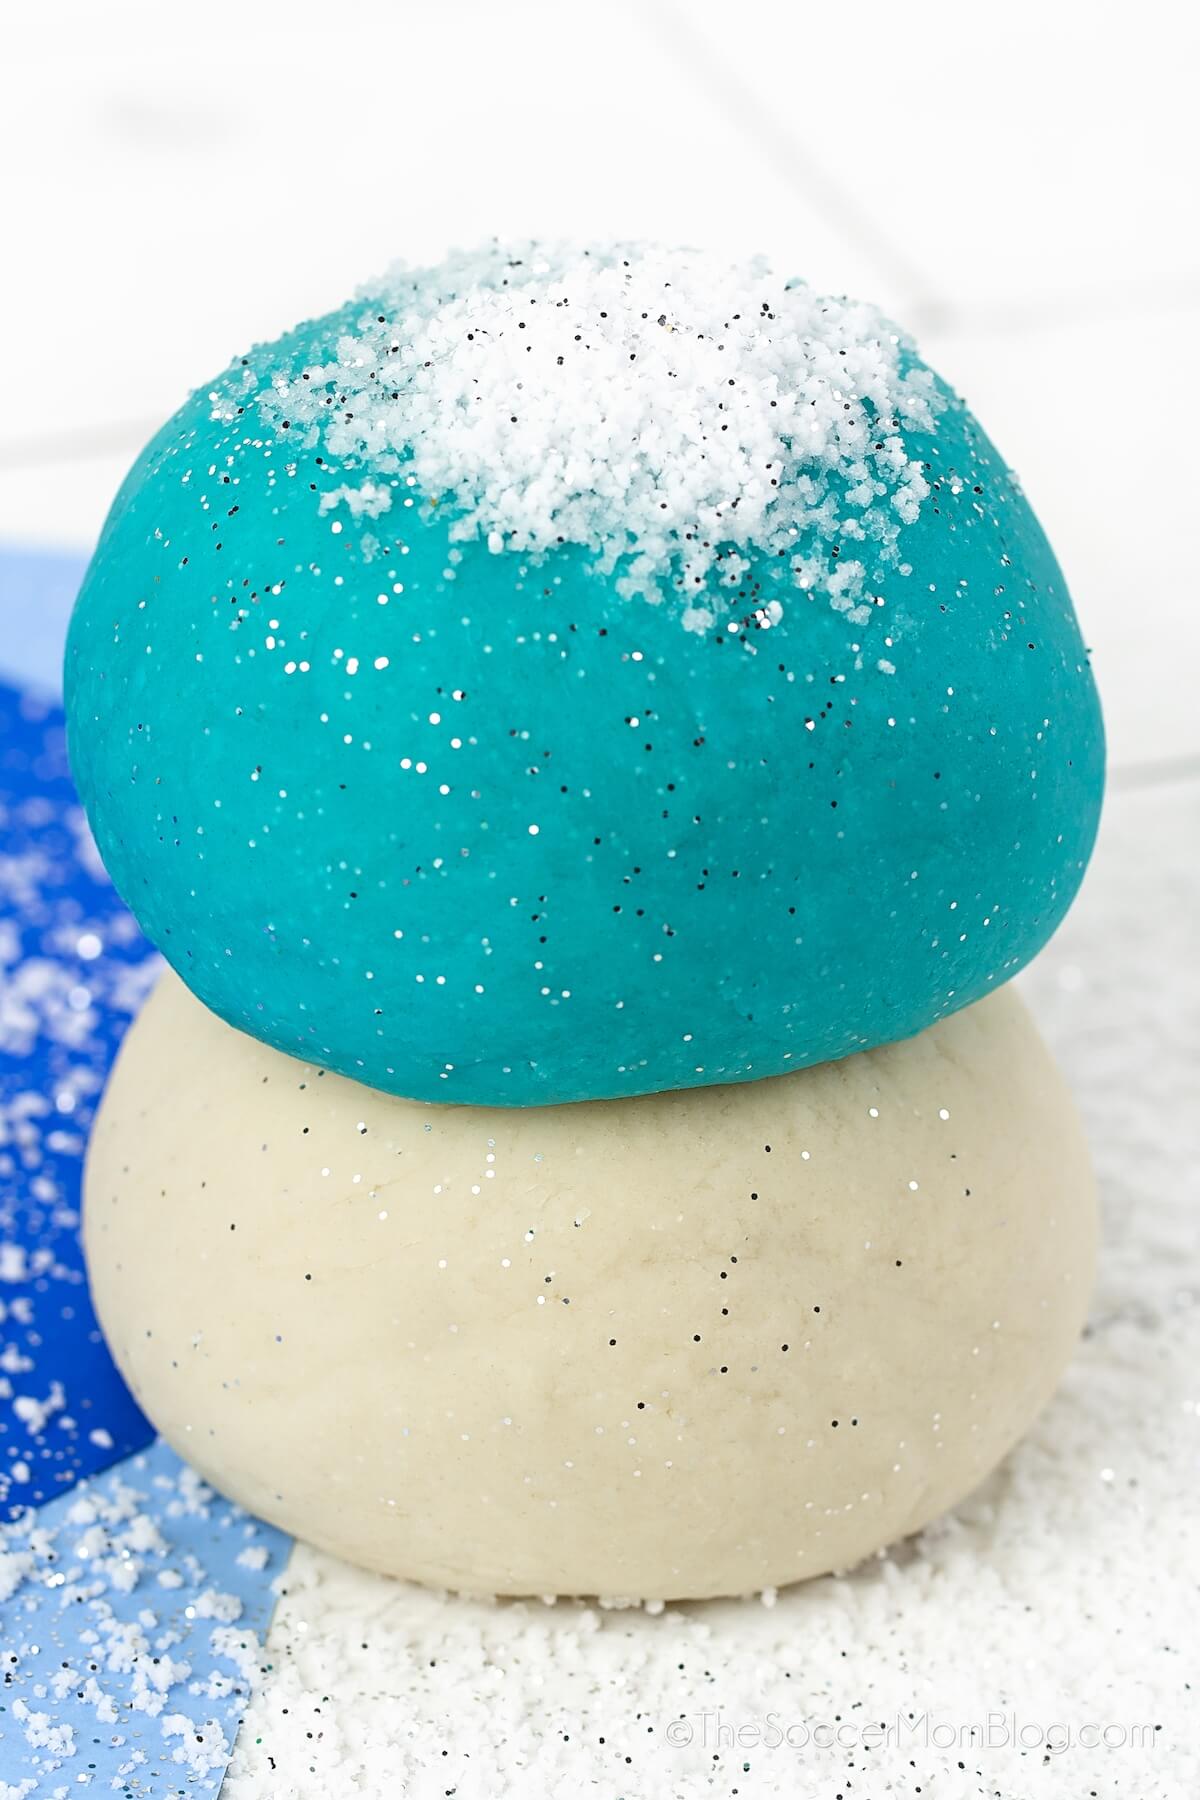 ball of blue playdough stacked on top of a ball of white playdough.